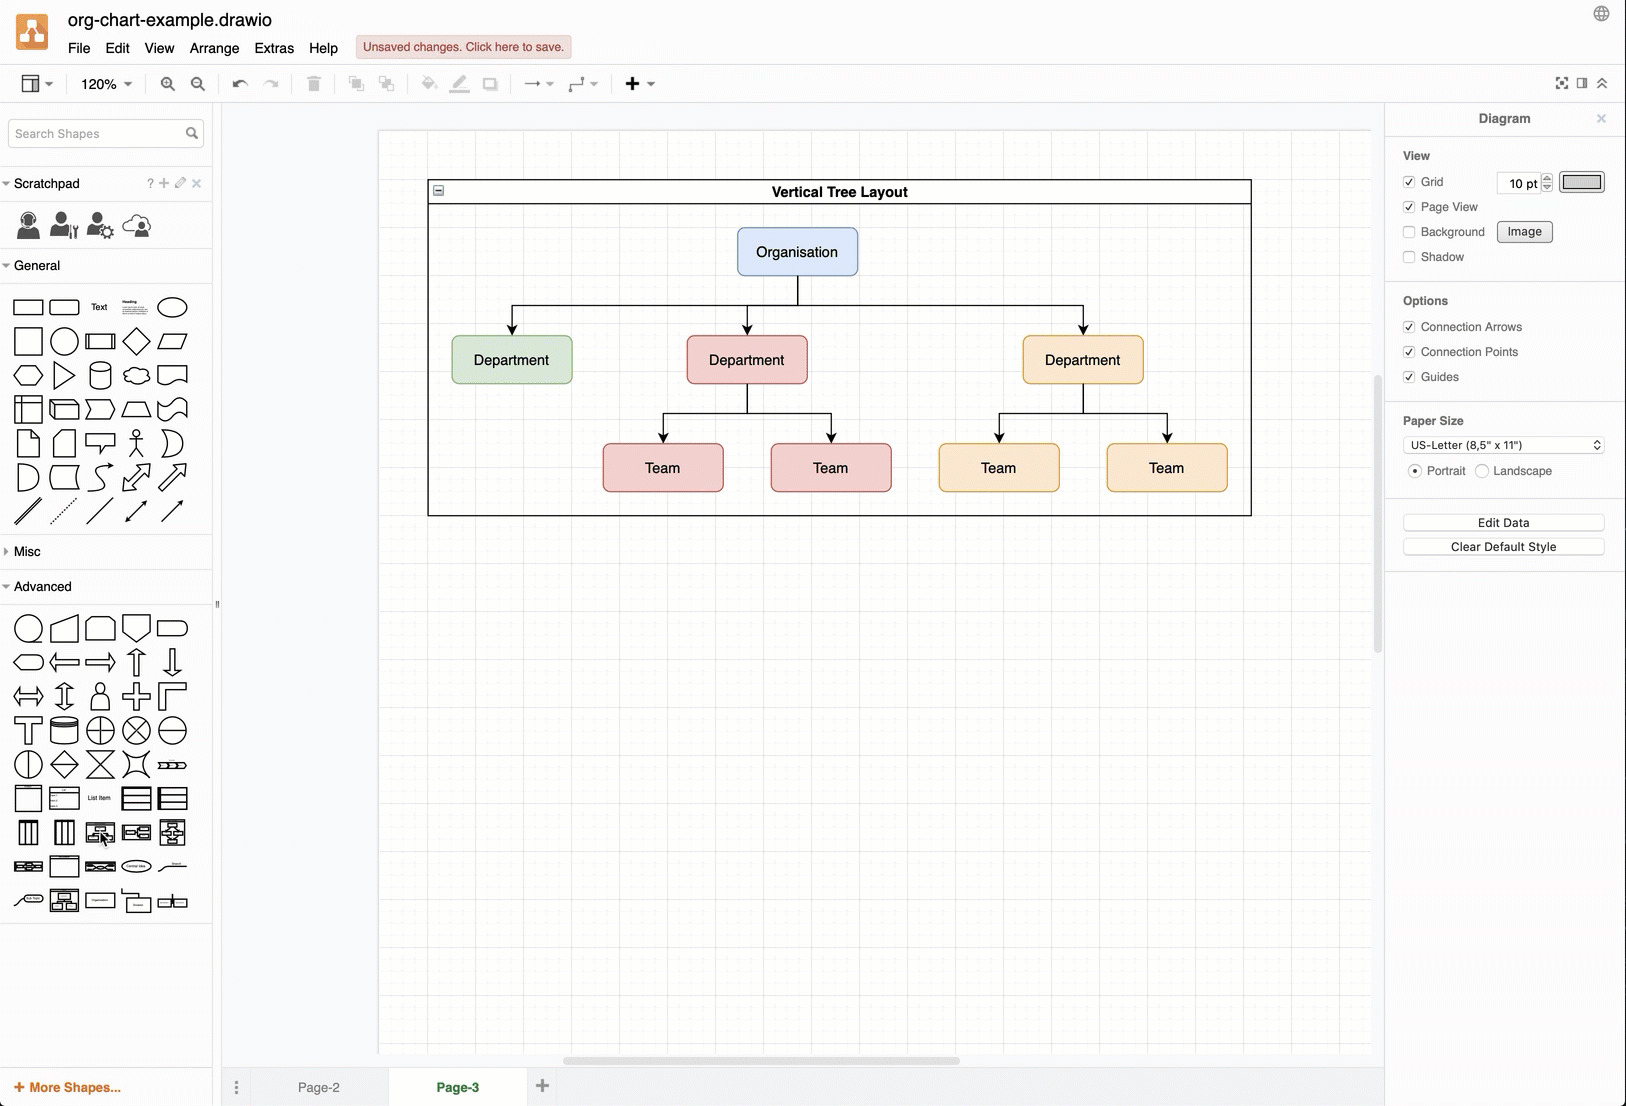 You can embed tree layout shapes inside each other to make complex, interactive org charts in draw.io